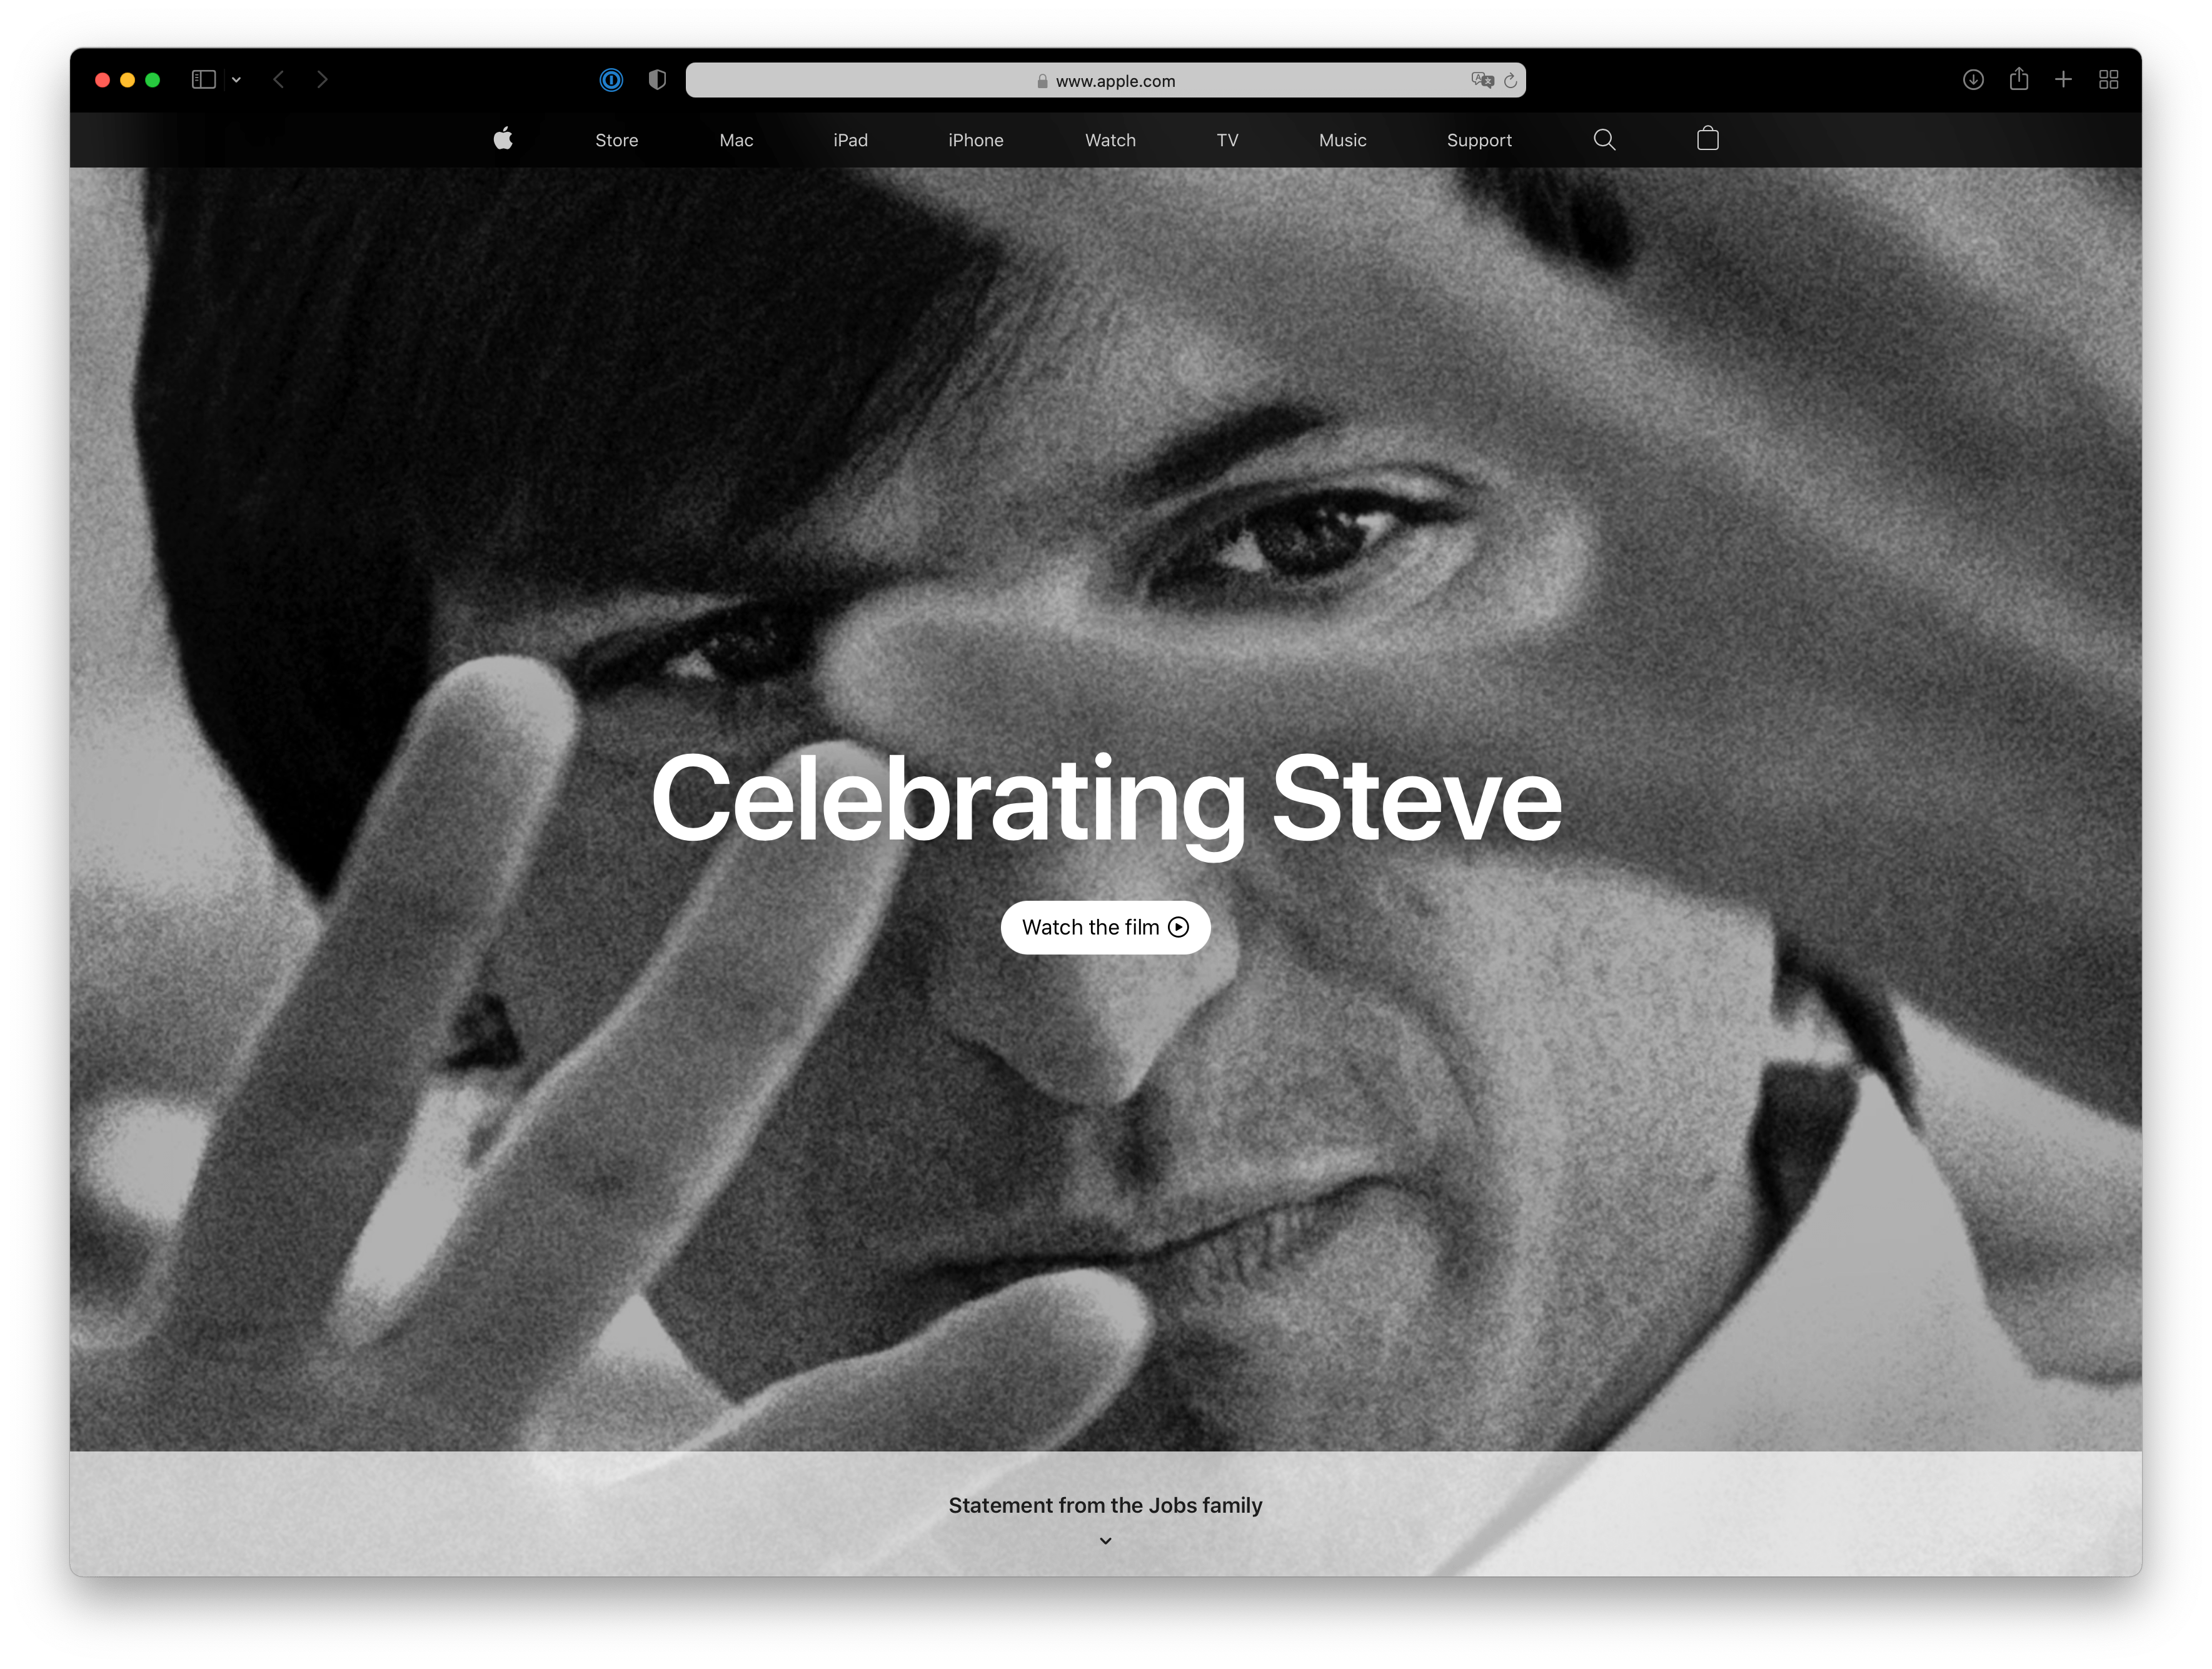 Screenshot of apple.com displaying a black and white photo of Steve Jobs with his hands in front of his face, probably explaining something with passion